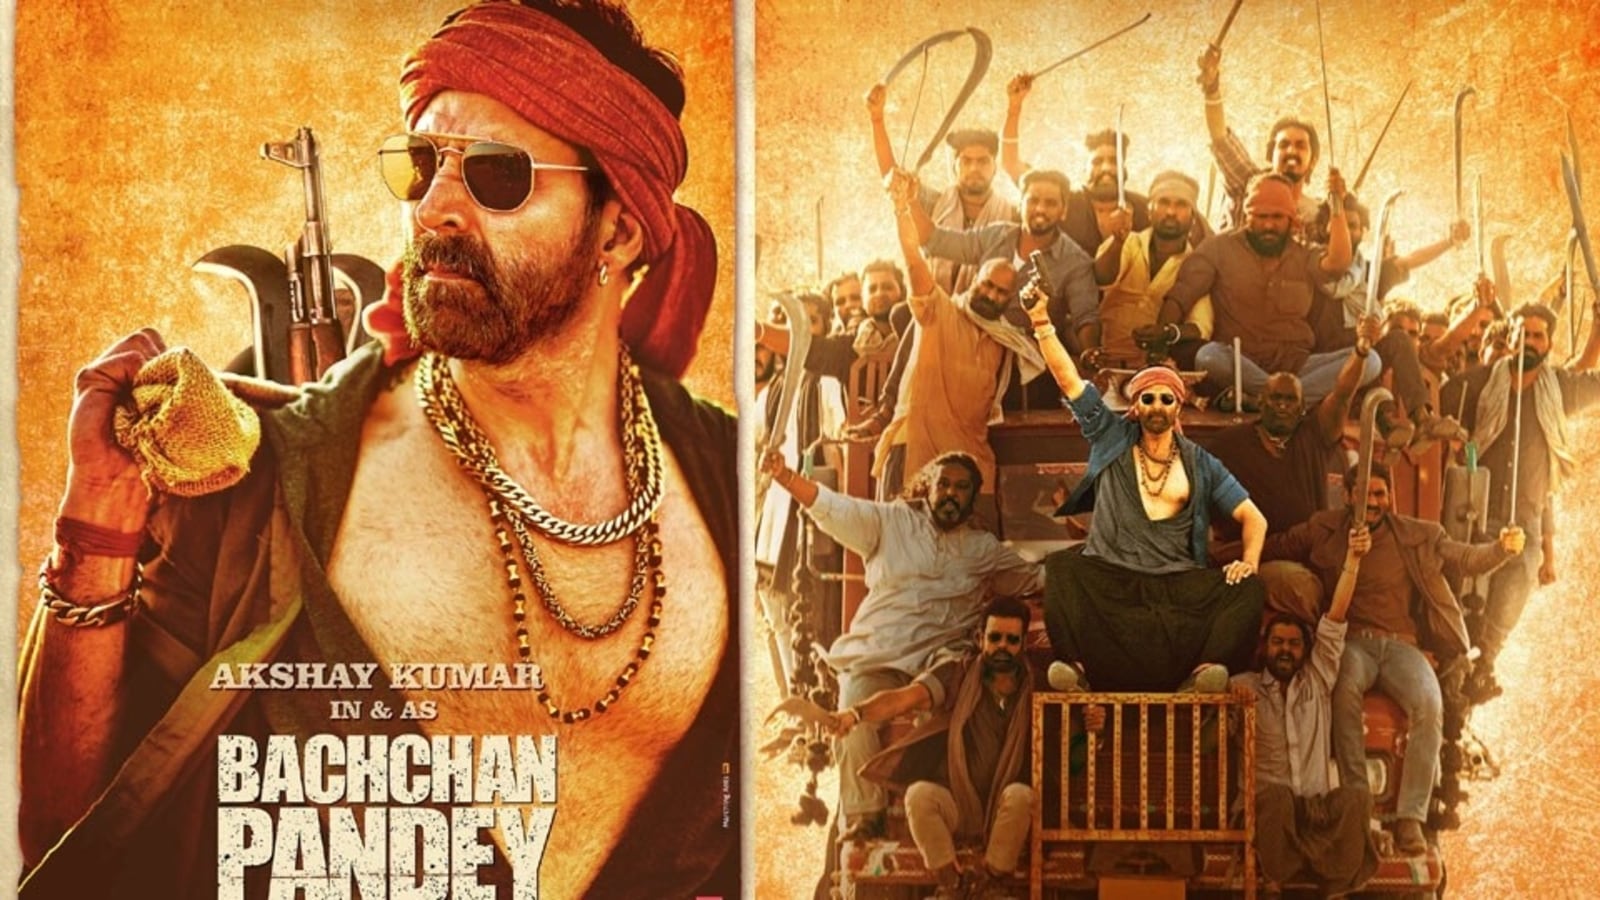 Akshay Kumar shares new Bachchan Pandey posters, film to release on Holi -  Hindustan Times